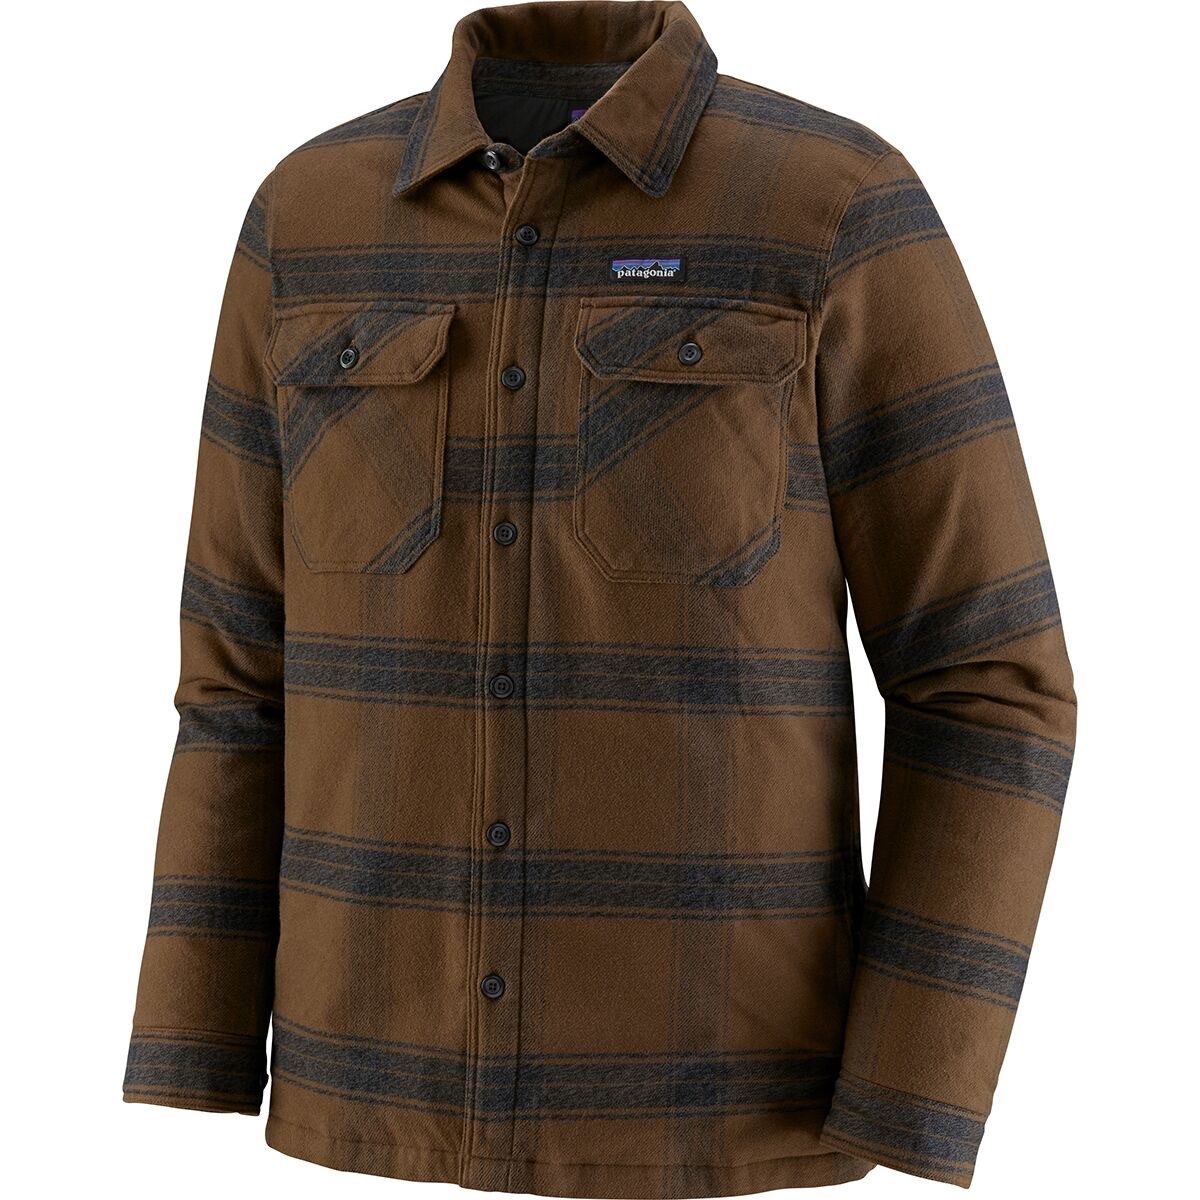 Patagonia M's Insulated Fjord Flannel Jacket - Observer: Woolly Blue - XL